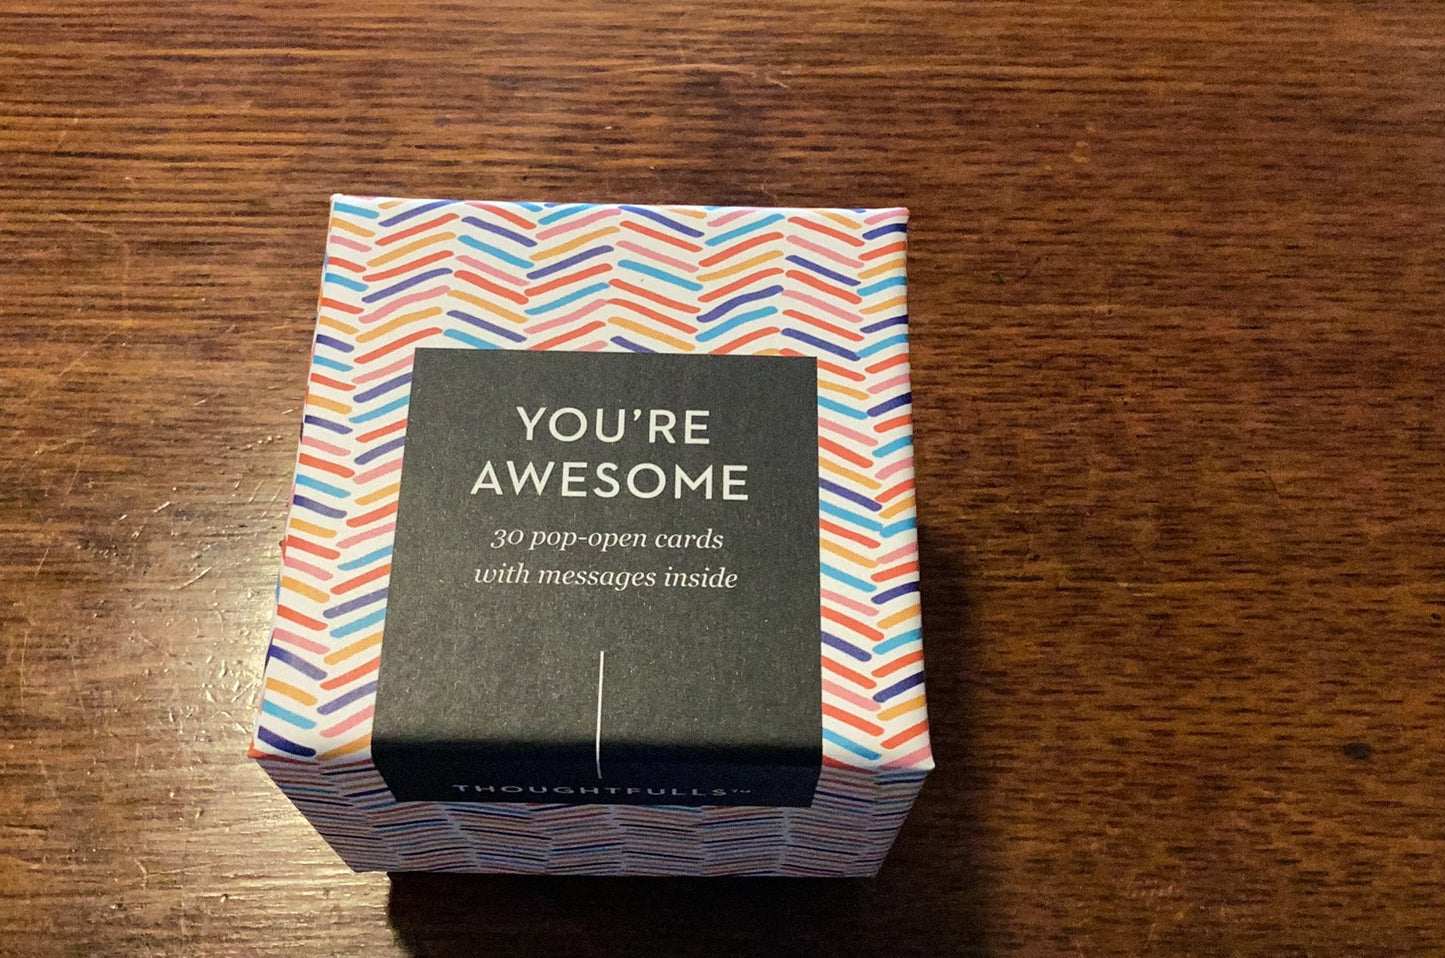 YOU’RE AWESOME | Thoughtfulls